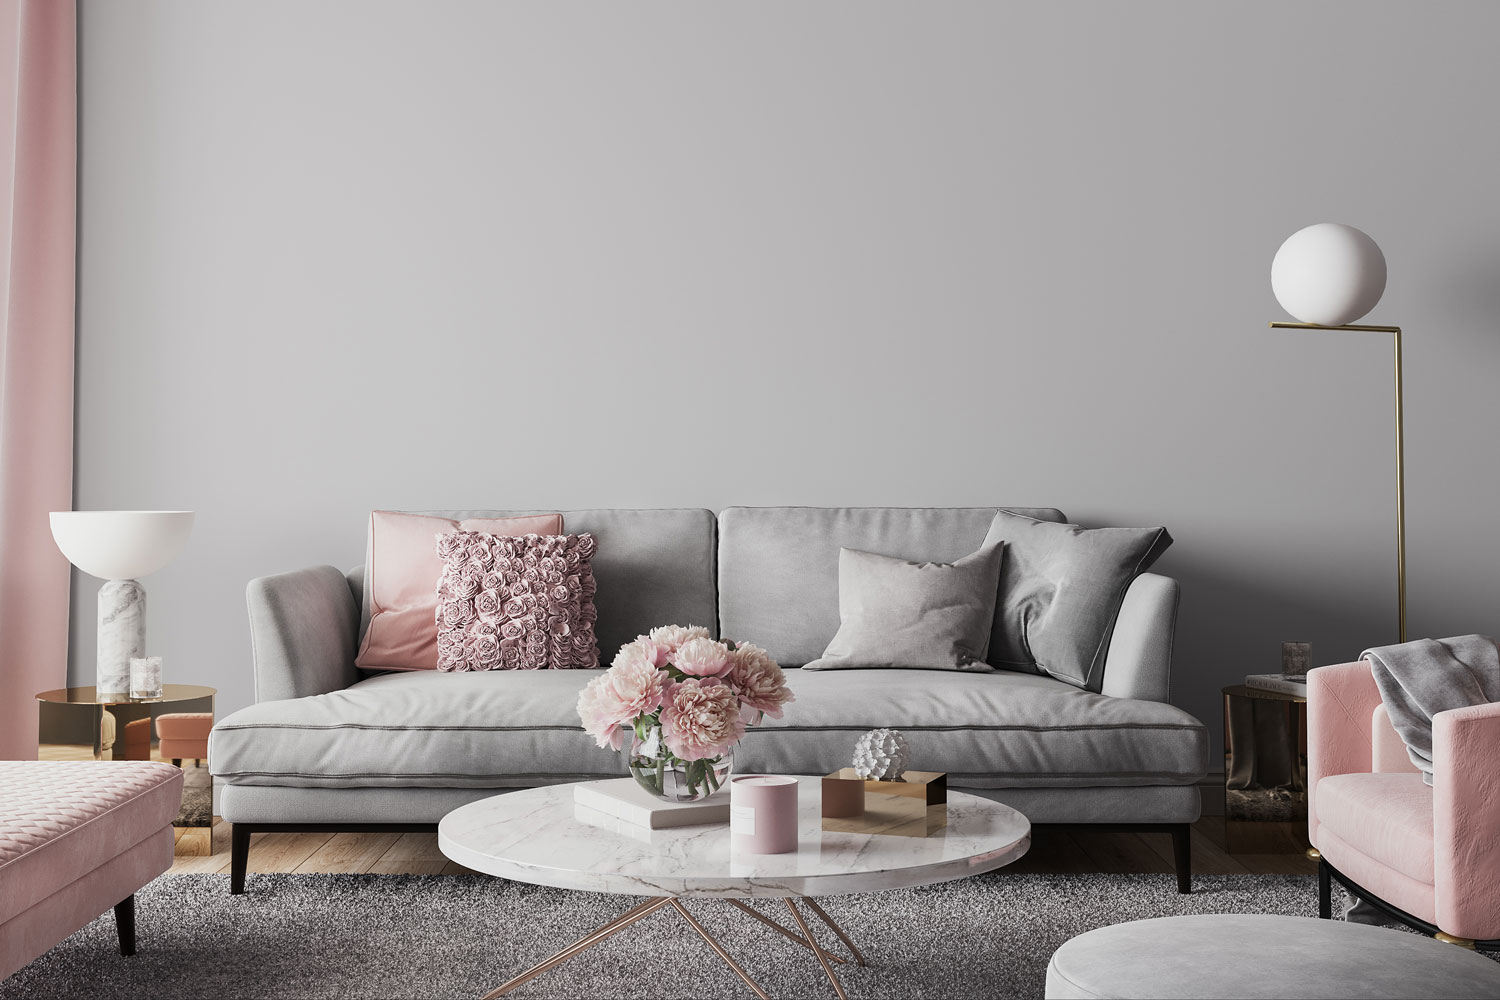 Gray and pink themed living room with gray and pink furniture's